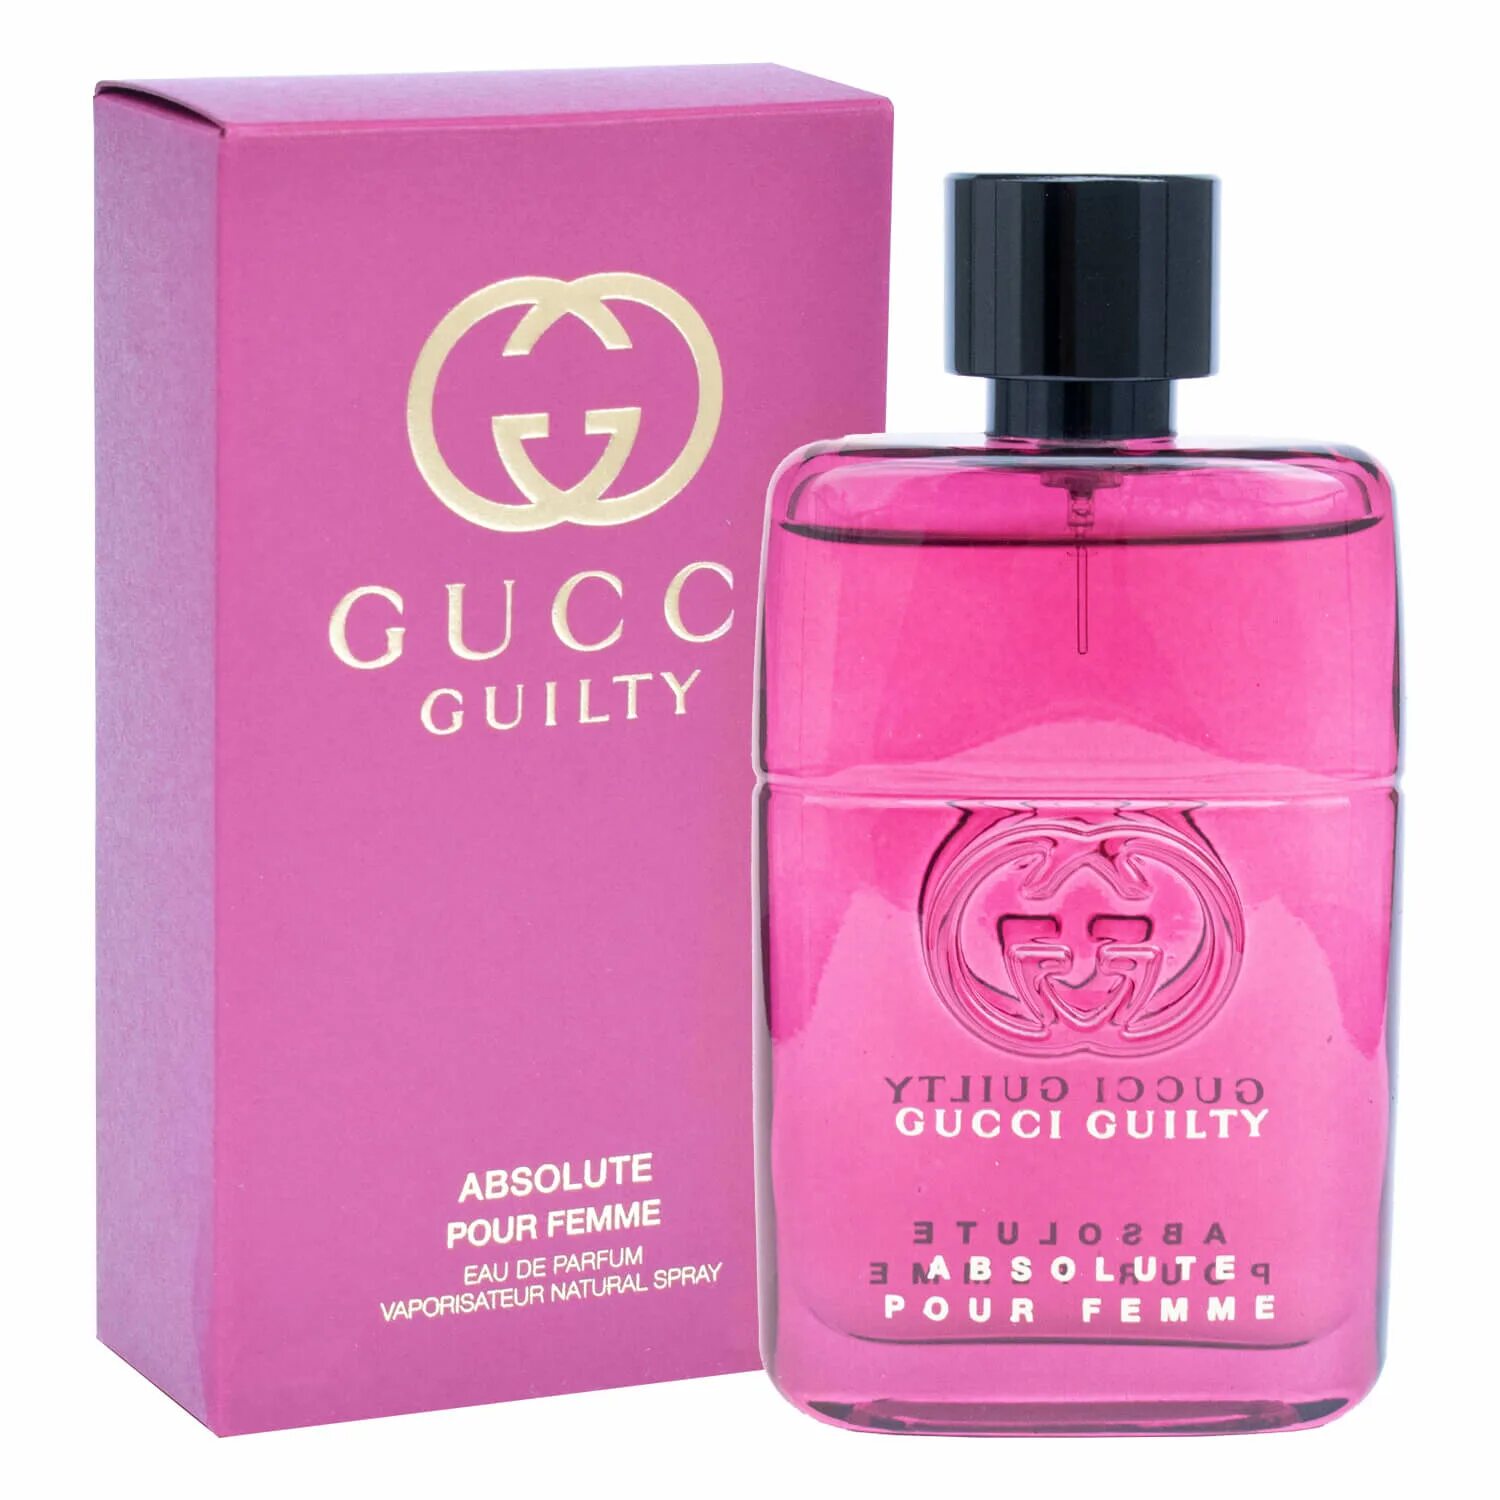 Gucci guilty absolute pour femme EDP 50ml. Gucci guilty absolute pour femme. Gucci guilty pour femme EDP 50ml. Gucci guilty absolute pour femme,90 мл.